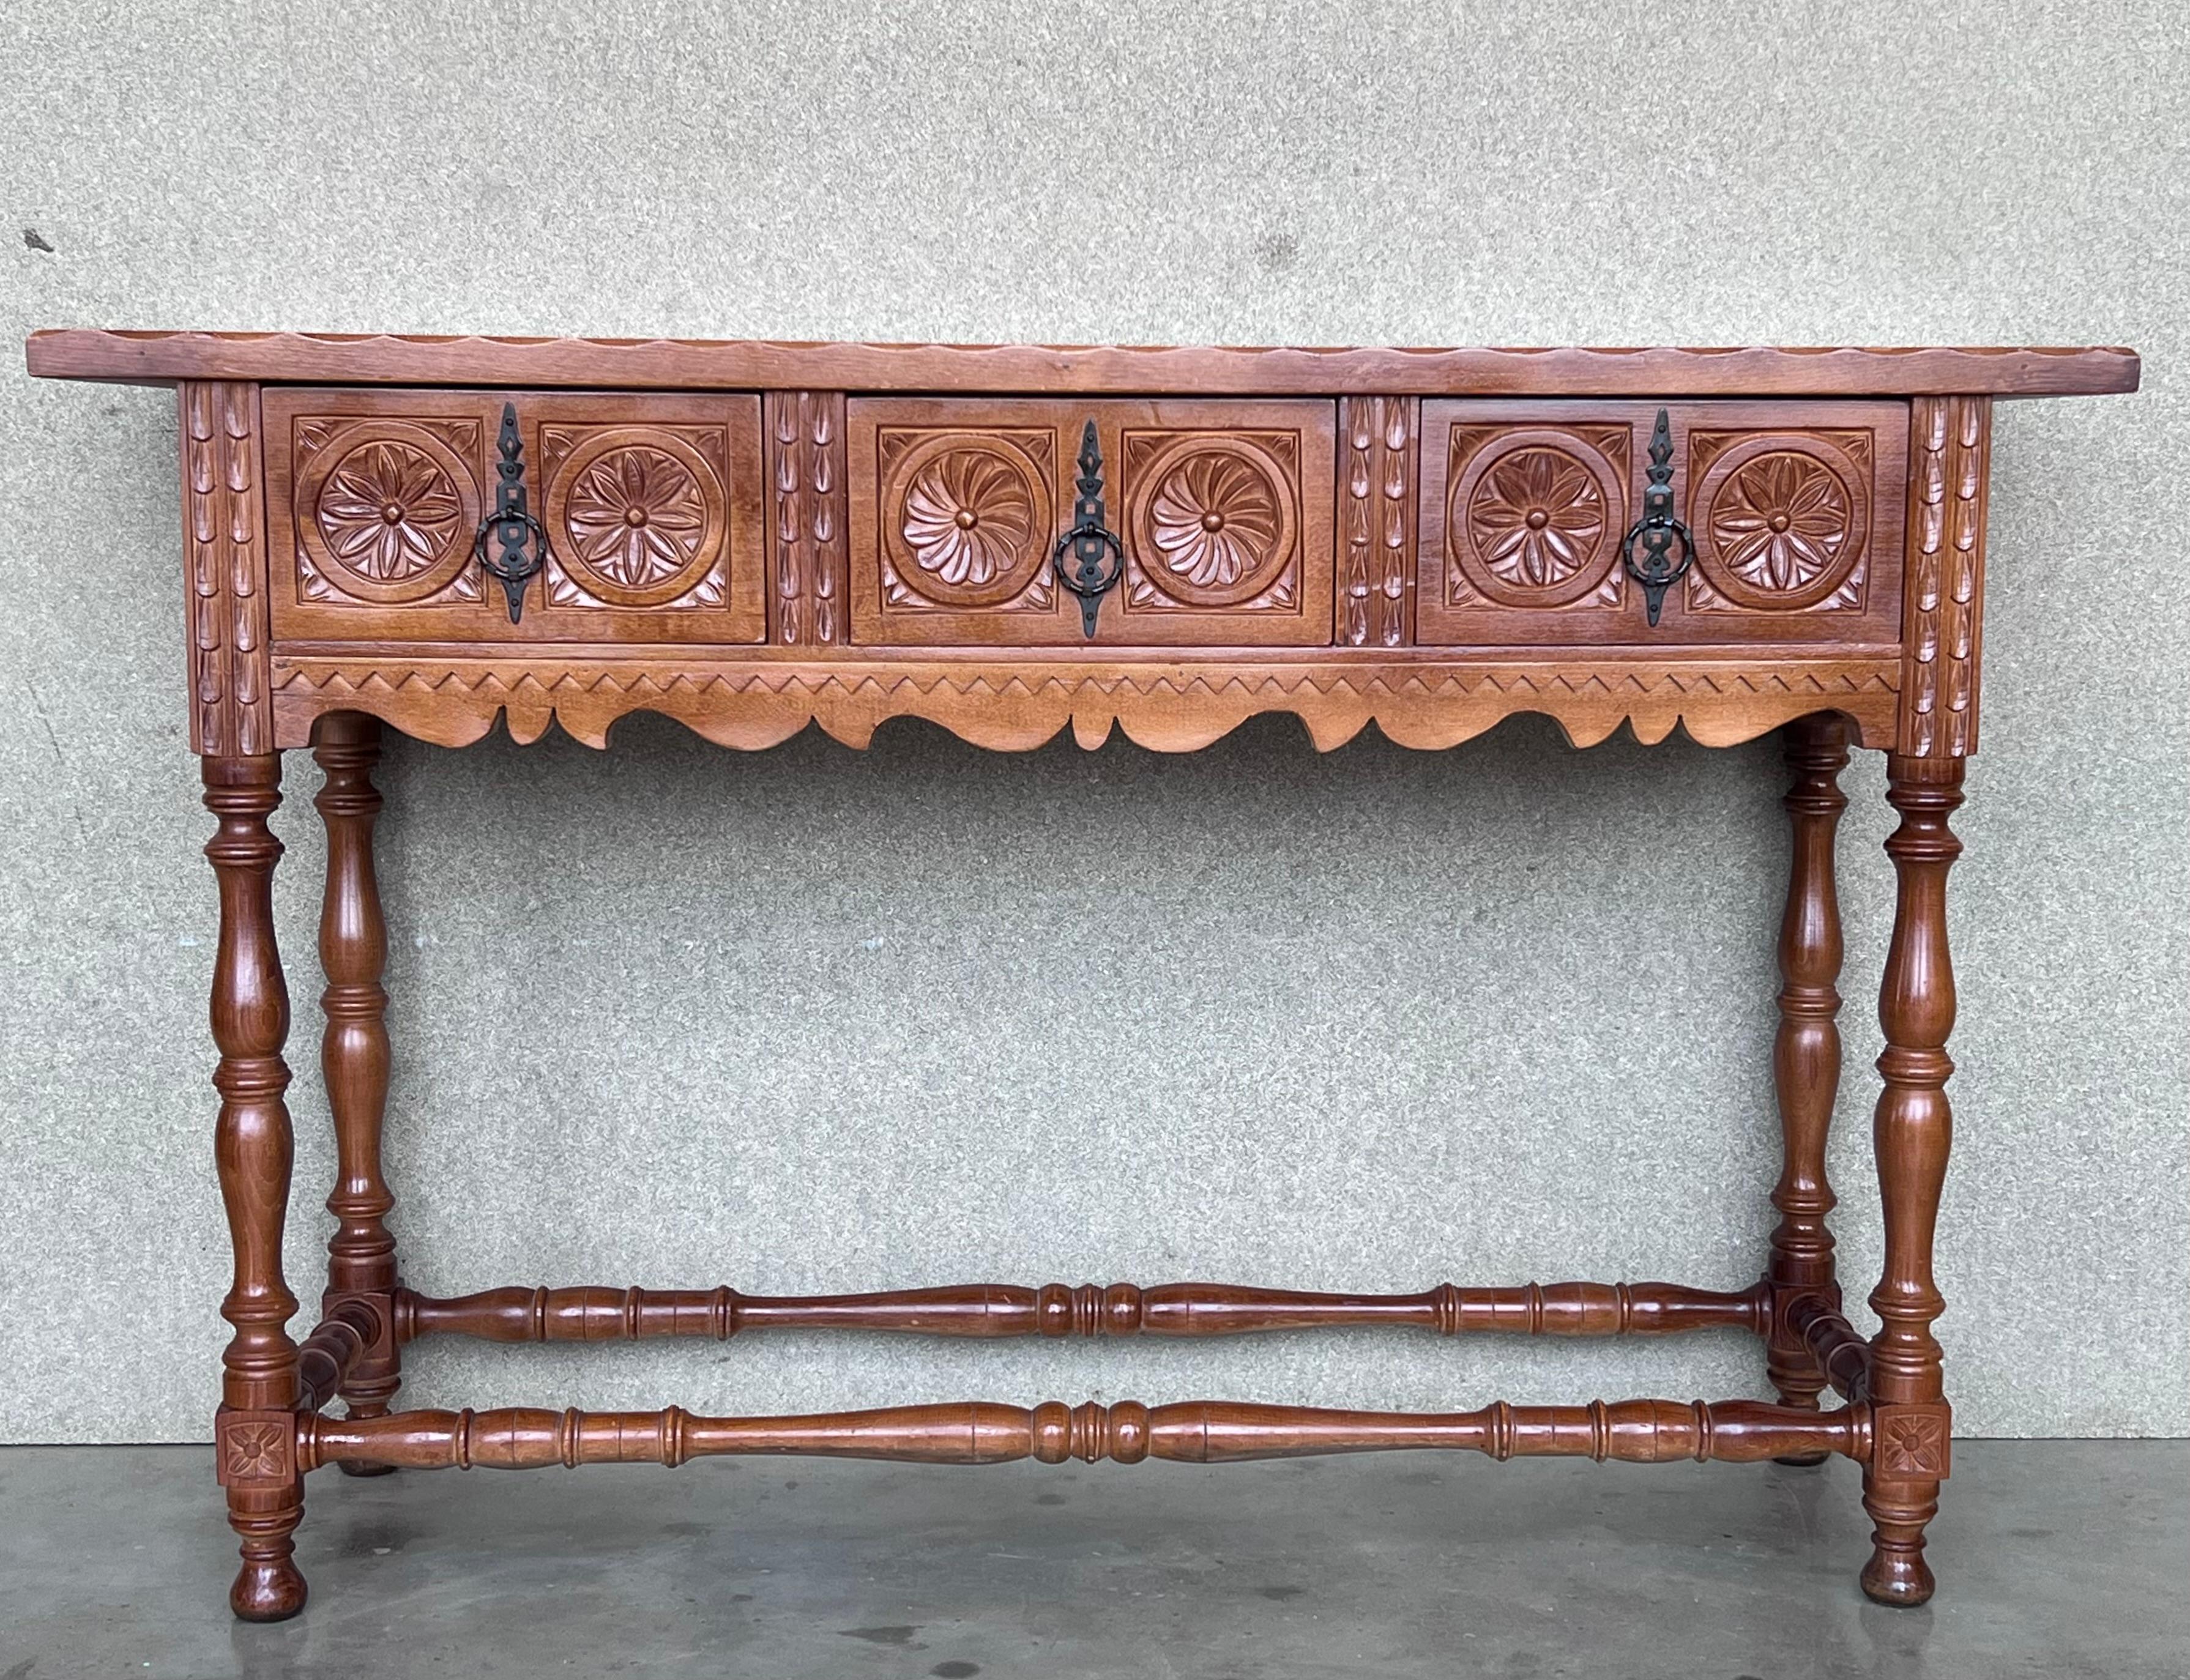 Late 19th century catalan spanish hand carved walnut console table with three drawers.
Very good quality carved Spanish console table, circa 1800-1900. Beautifully carved in walnut with good color and patina. Features three drawers with carved